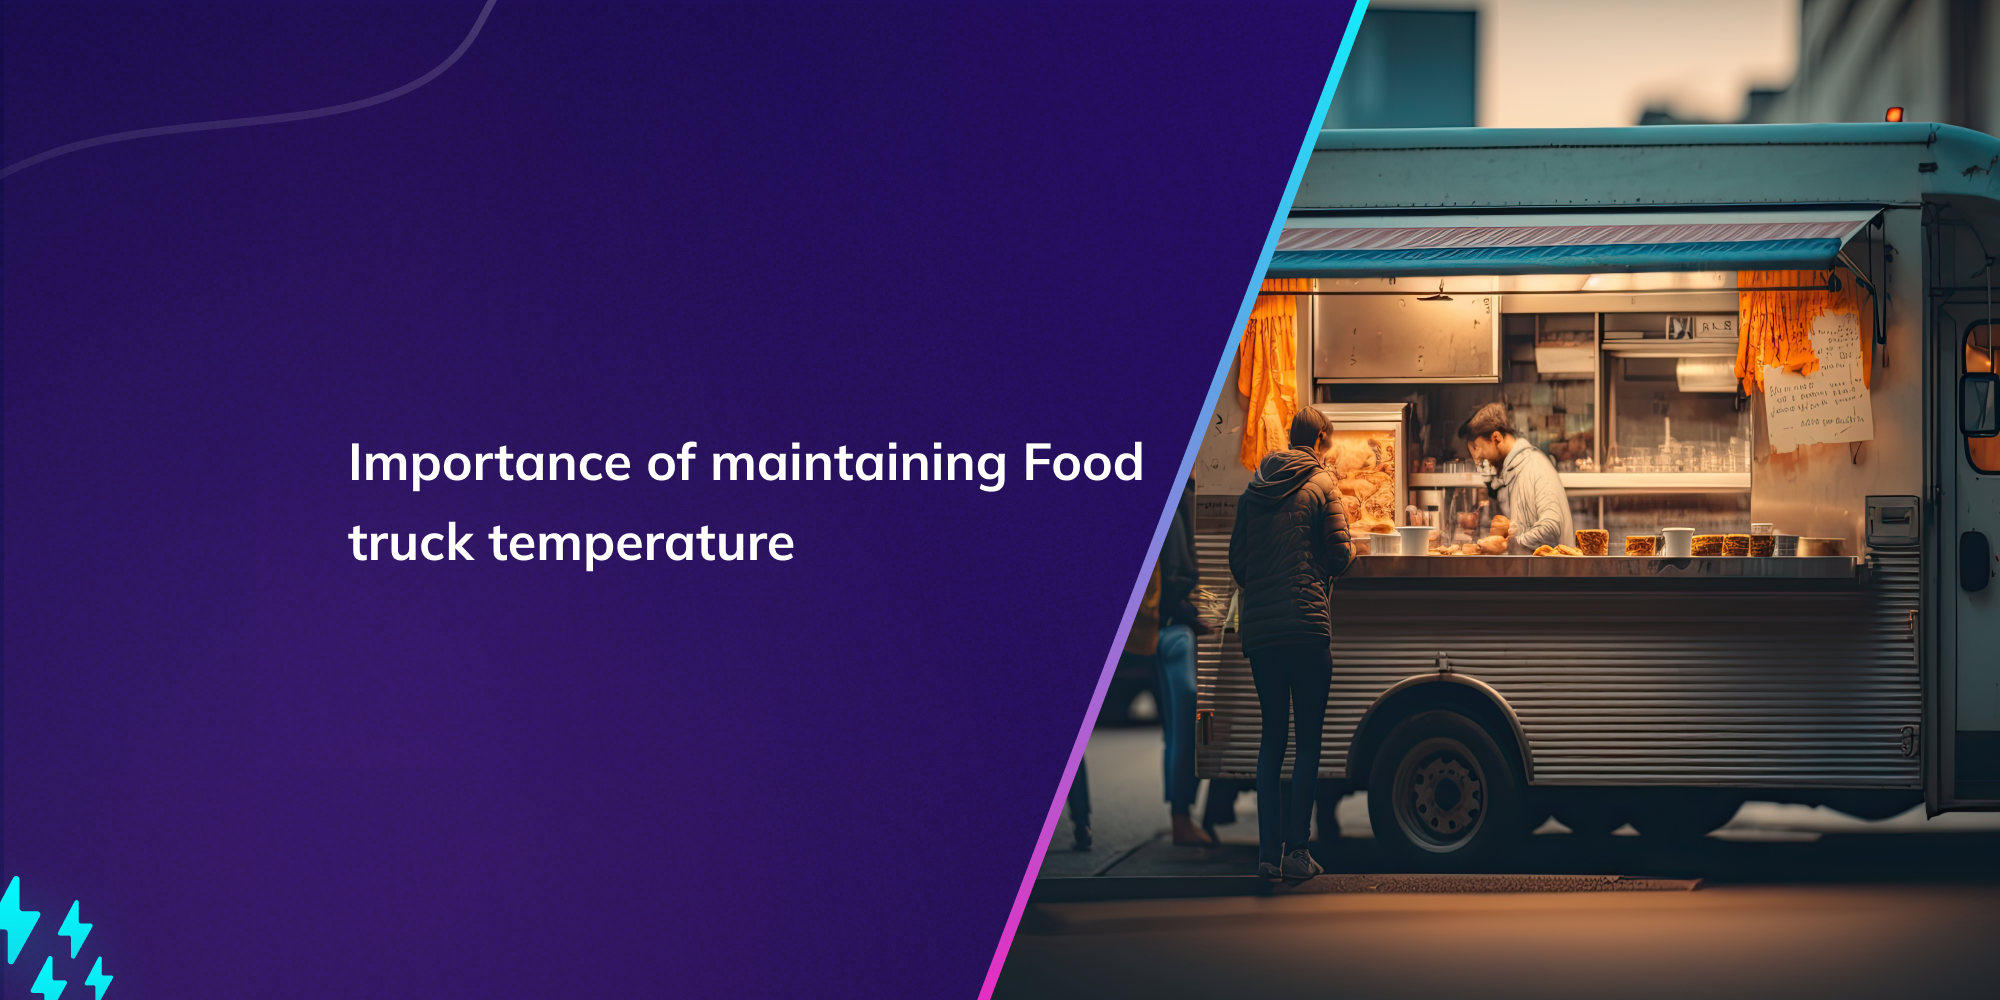 Importance of maintaining Food truck temperature